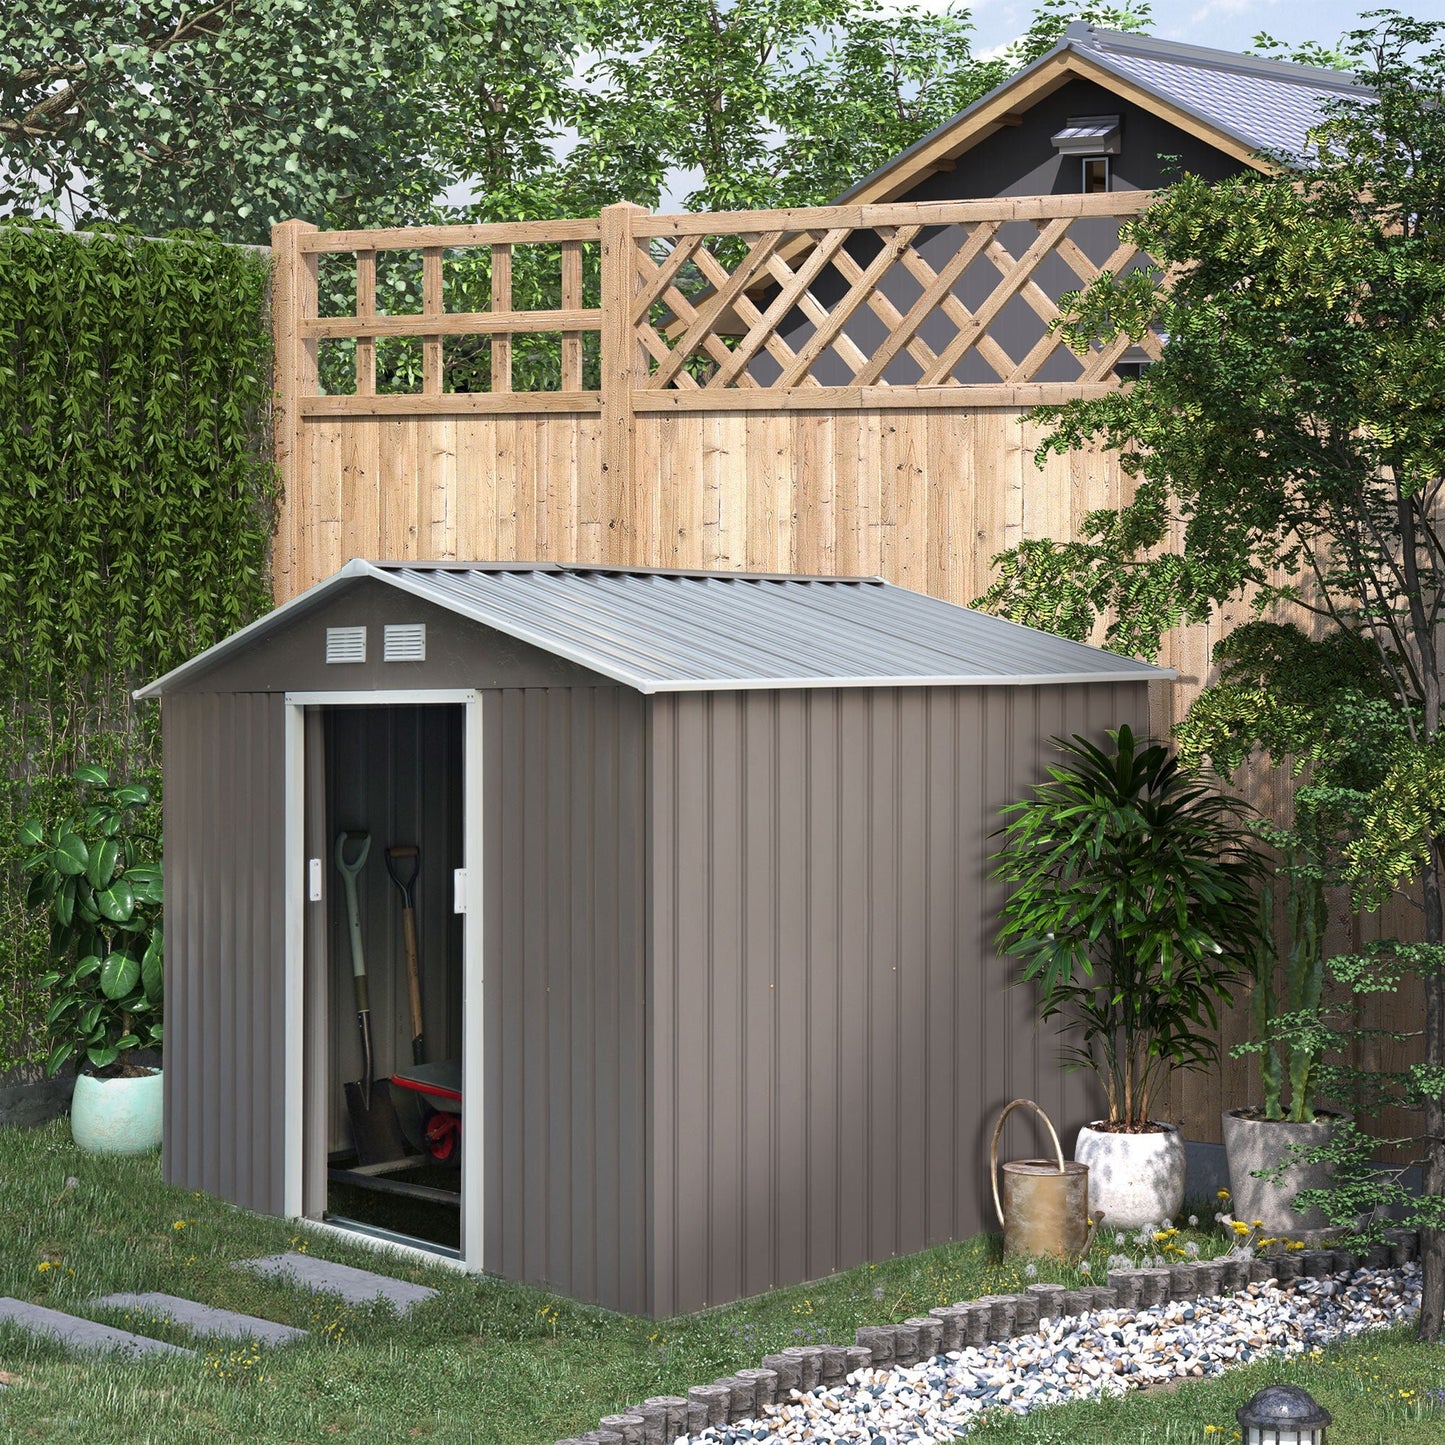 Outdoor and Garden-9' x 6' Metal Storage Shed Garden Tool House with 2 Sliding Doors & 4 Air Vents for Backyard, Patio, Lawn, Grey - Outdoor Style Company